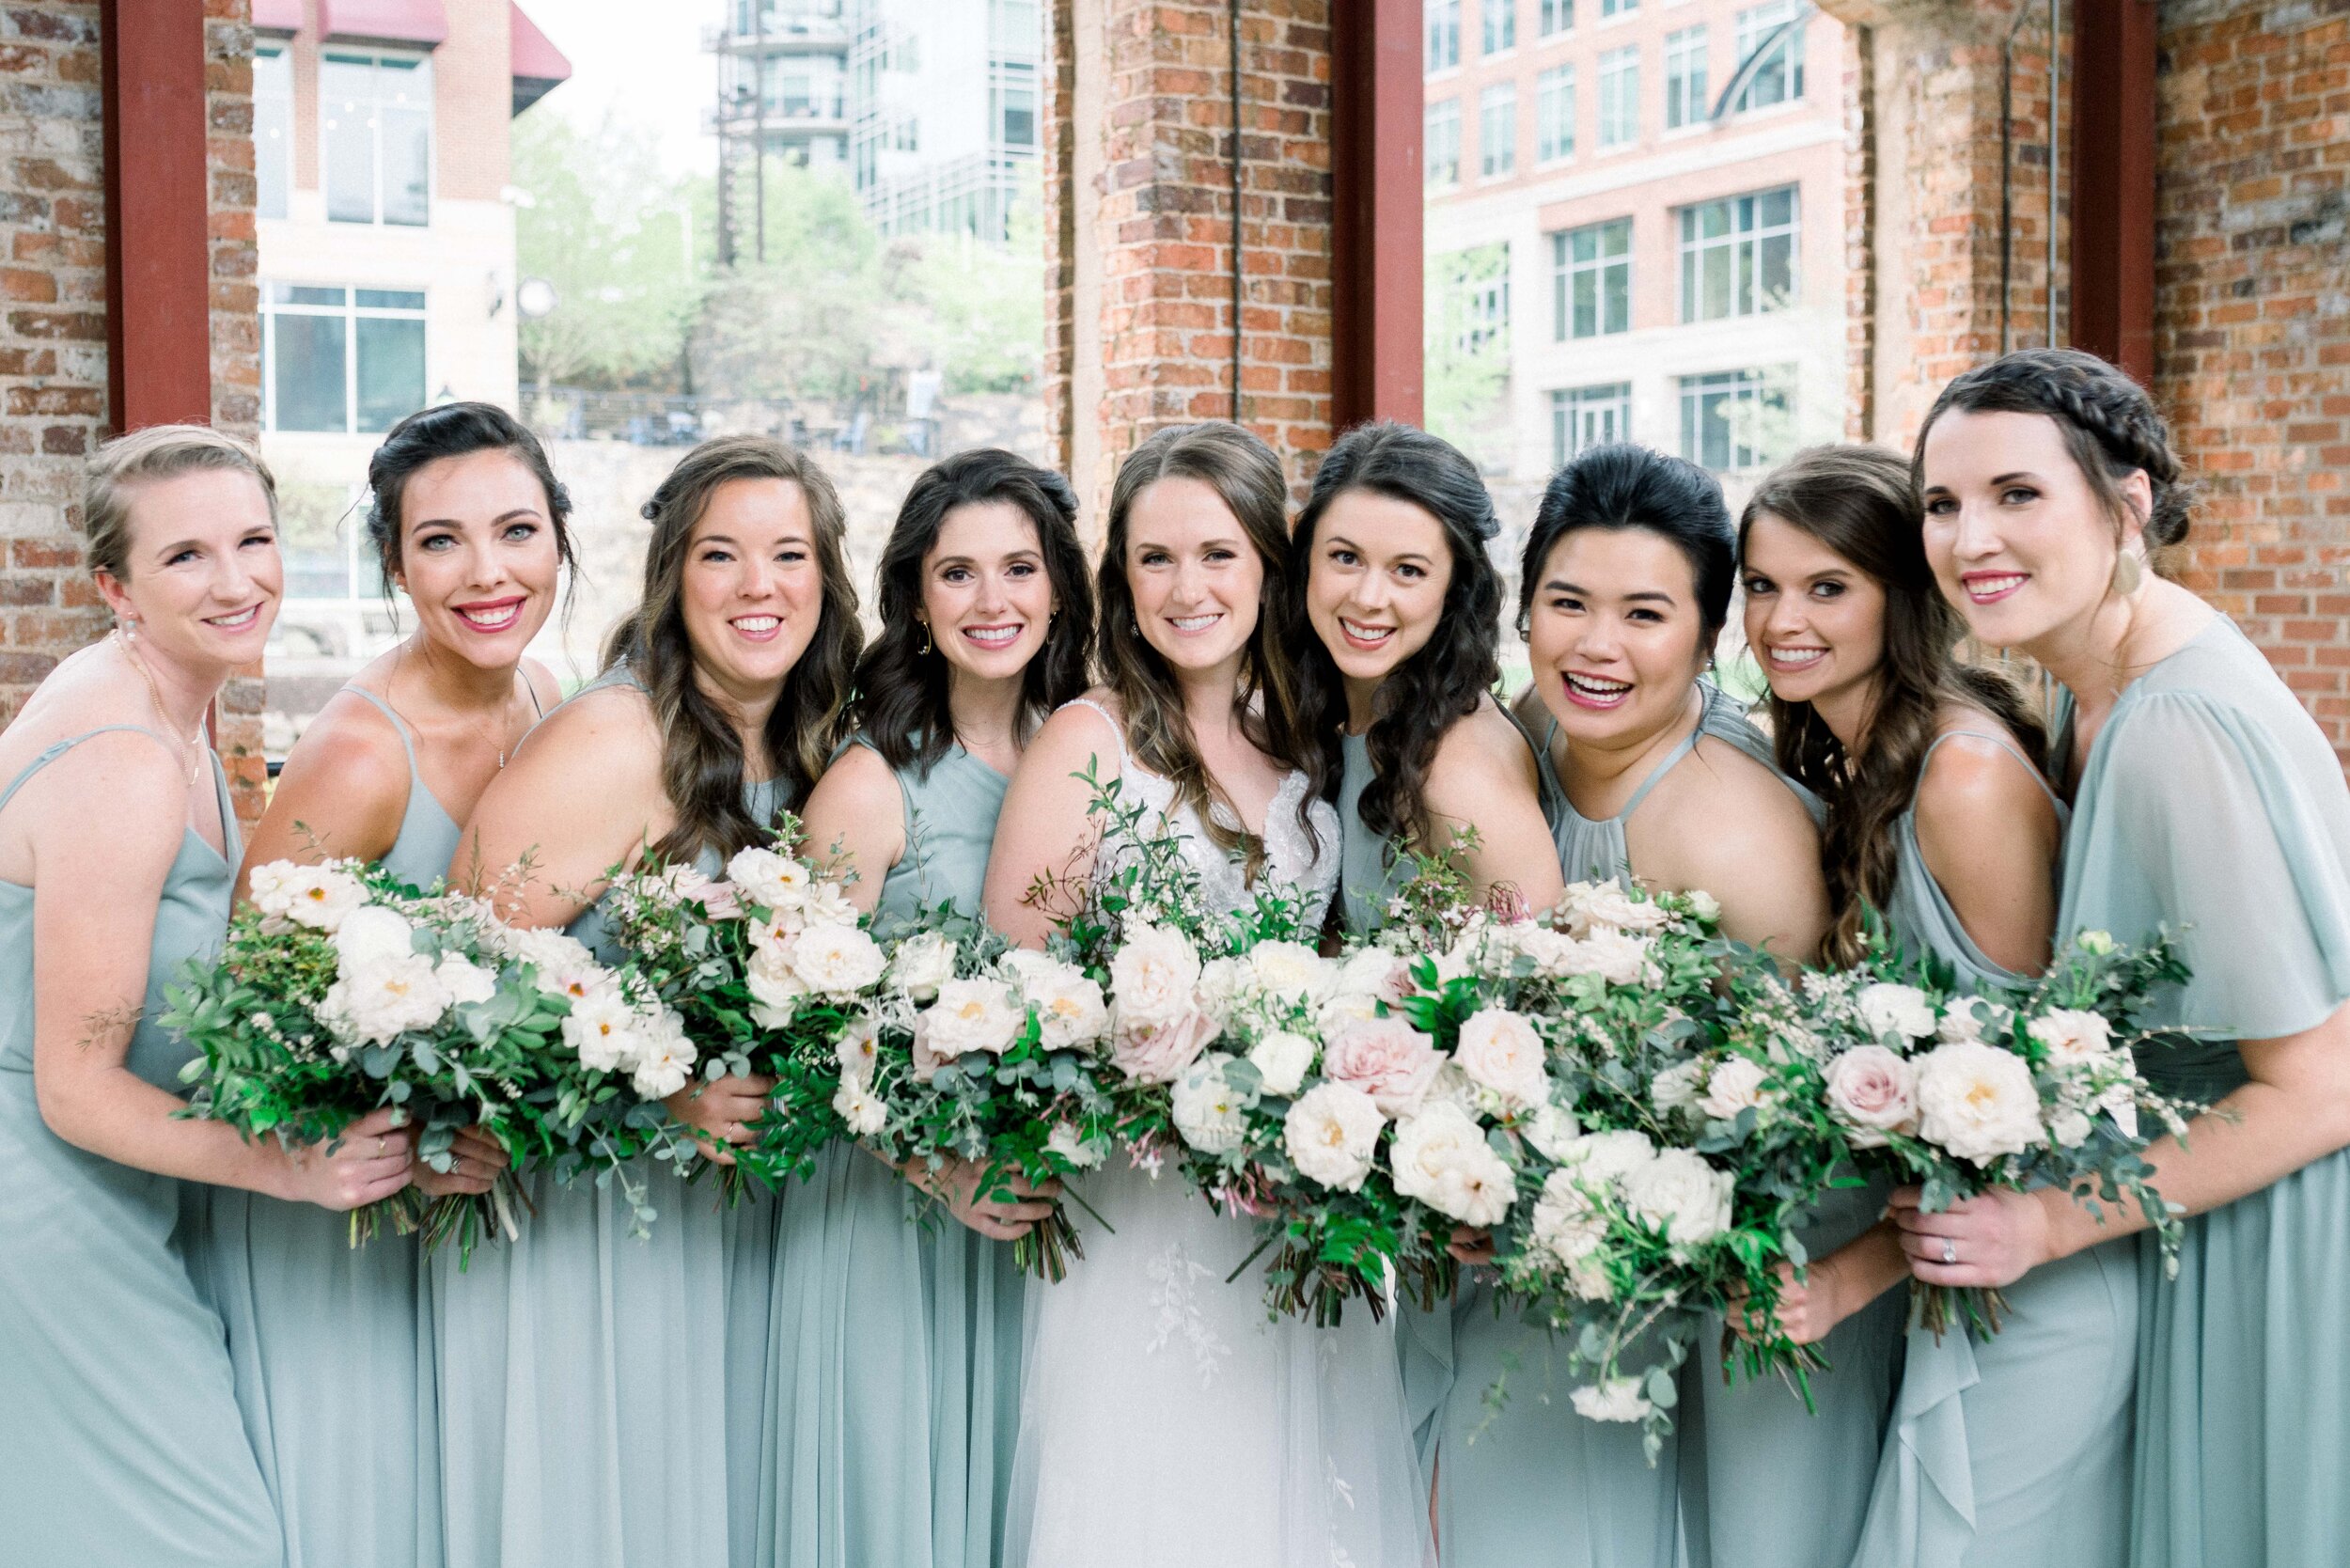 Champagne roses, cream garden roses, trailing jasmine, fluffy ranunculus, quicksand roses, majolica spray roses, and sage eucalyptus make up this gorgeous bridal bouquet. Designed by florist Rosemary & Finch in Nashville, TN.